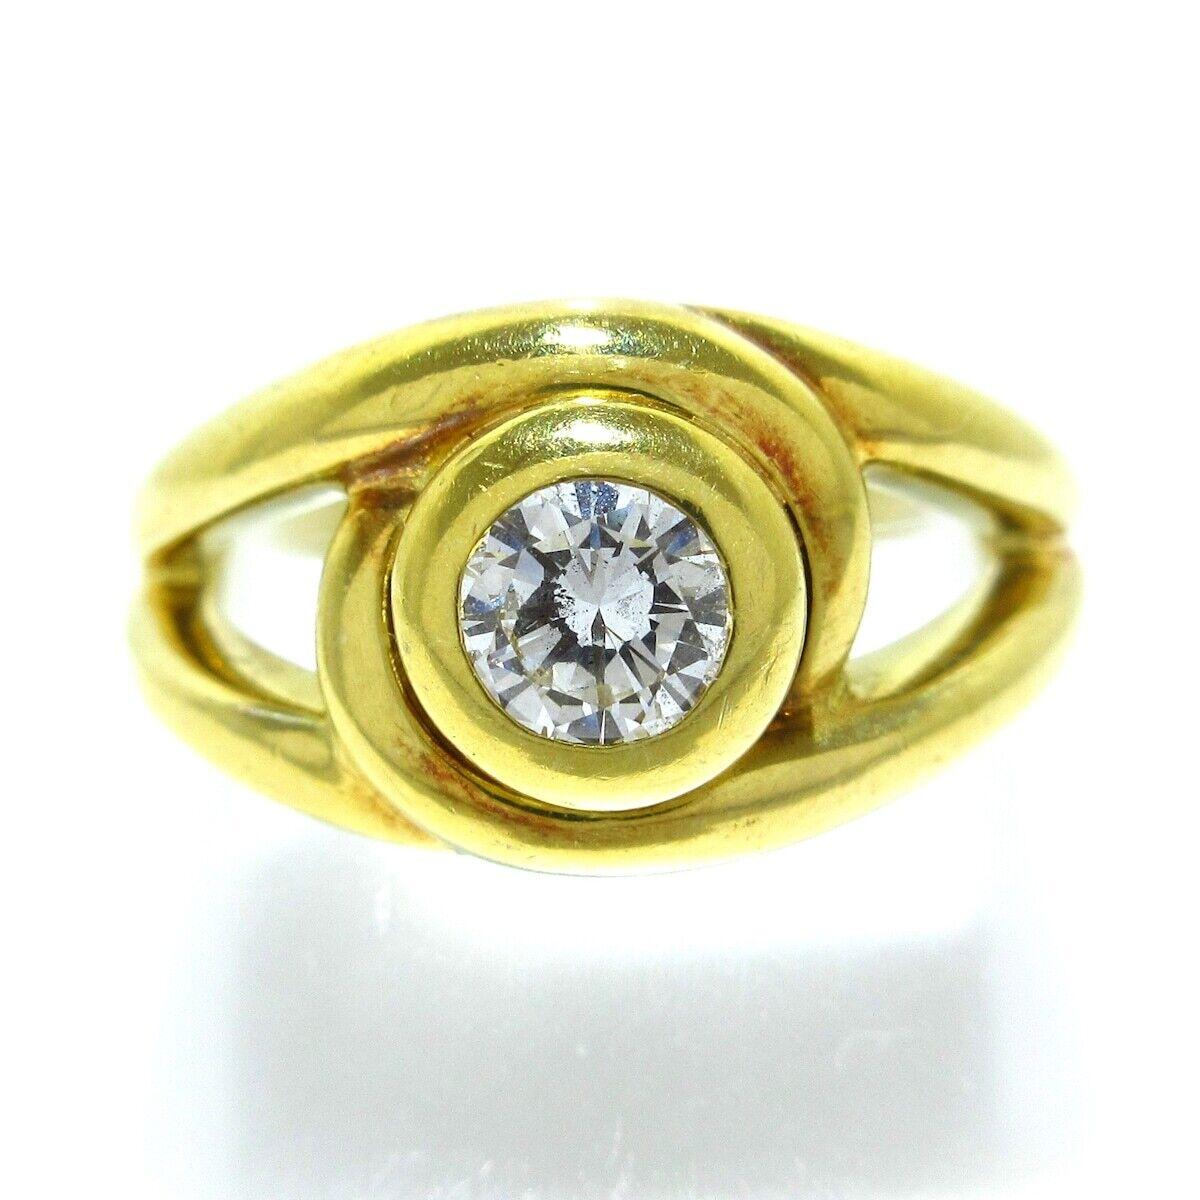 CARTIER 18k Yellow Gold & Diamond Solitaire Ring Vintage 1970s European Rare For Sale 8